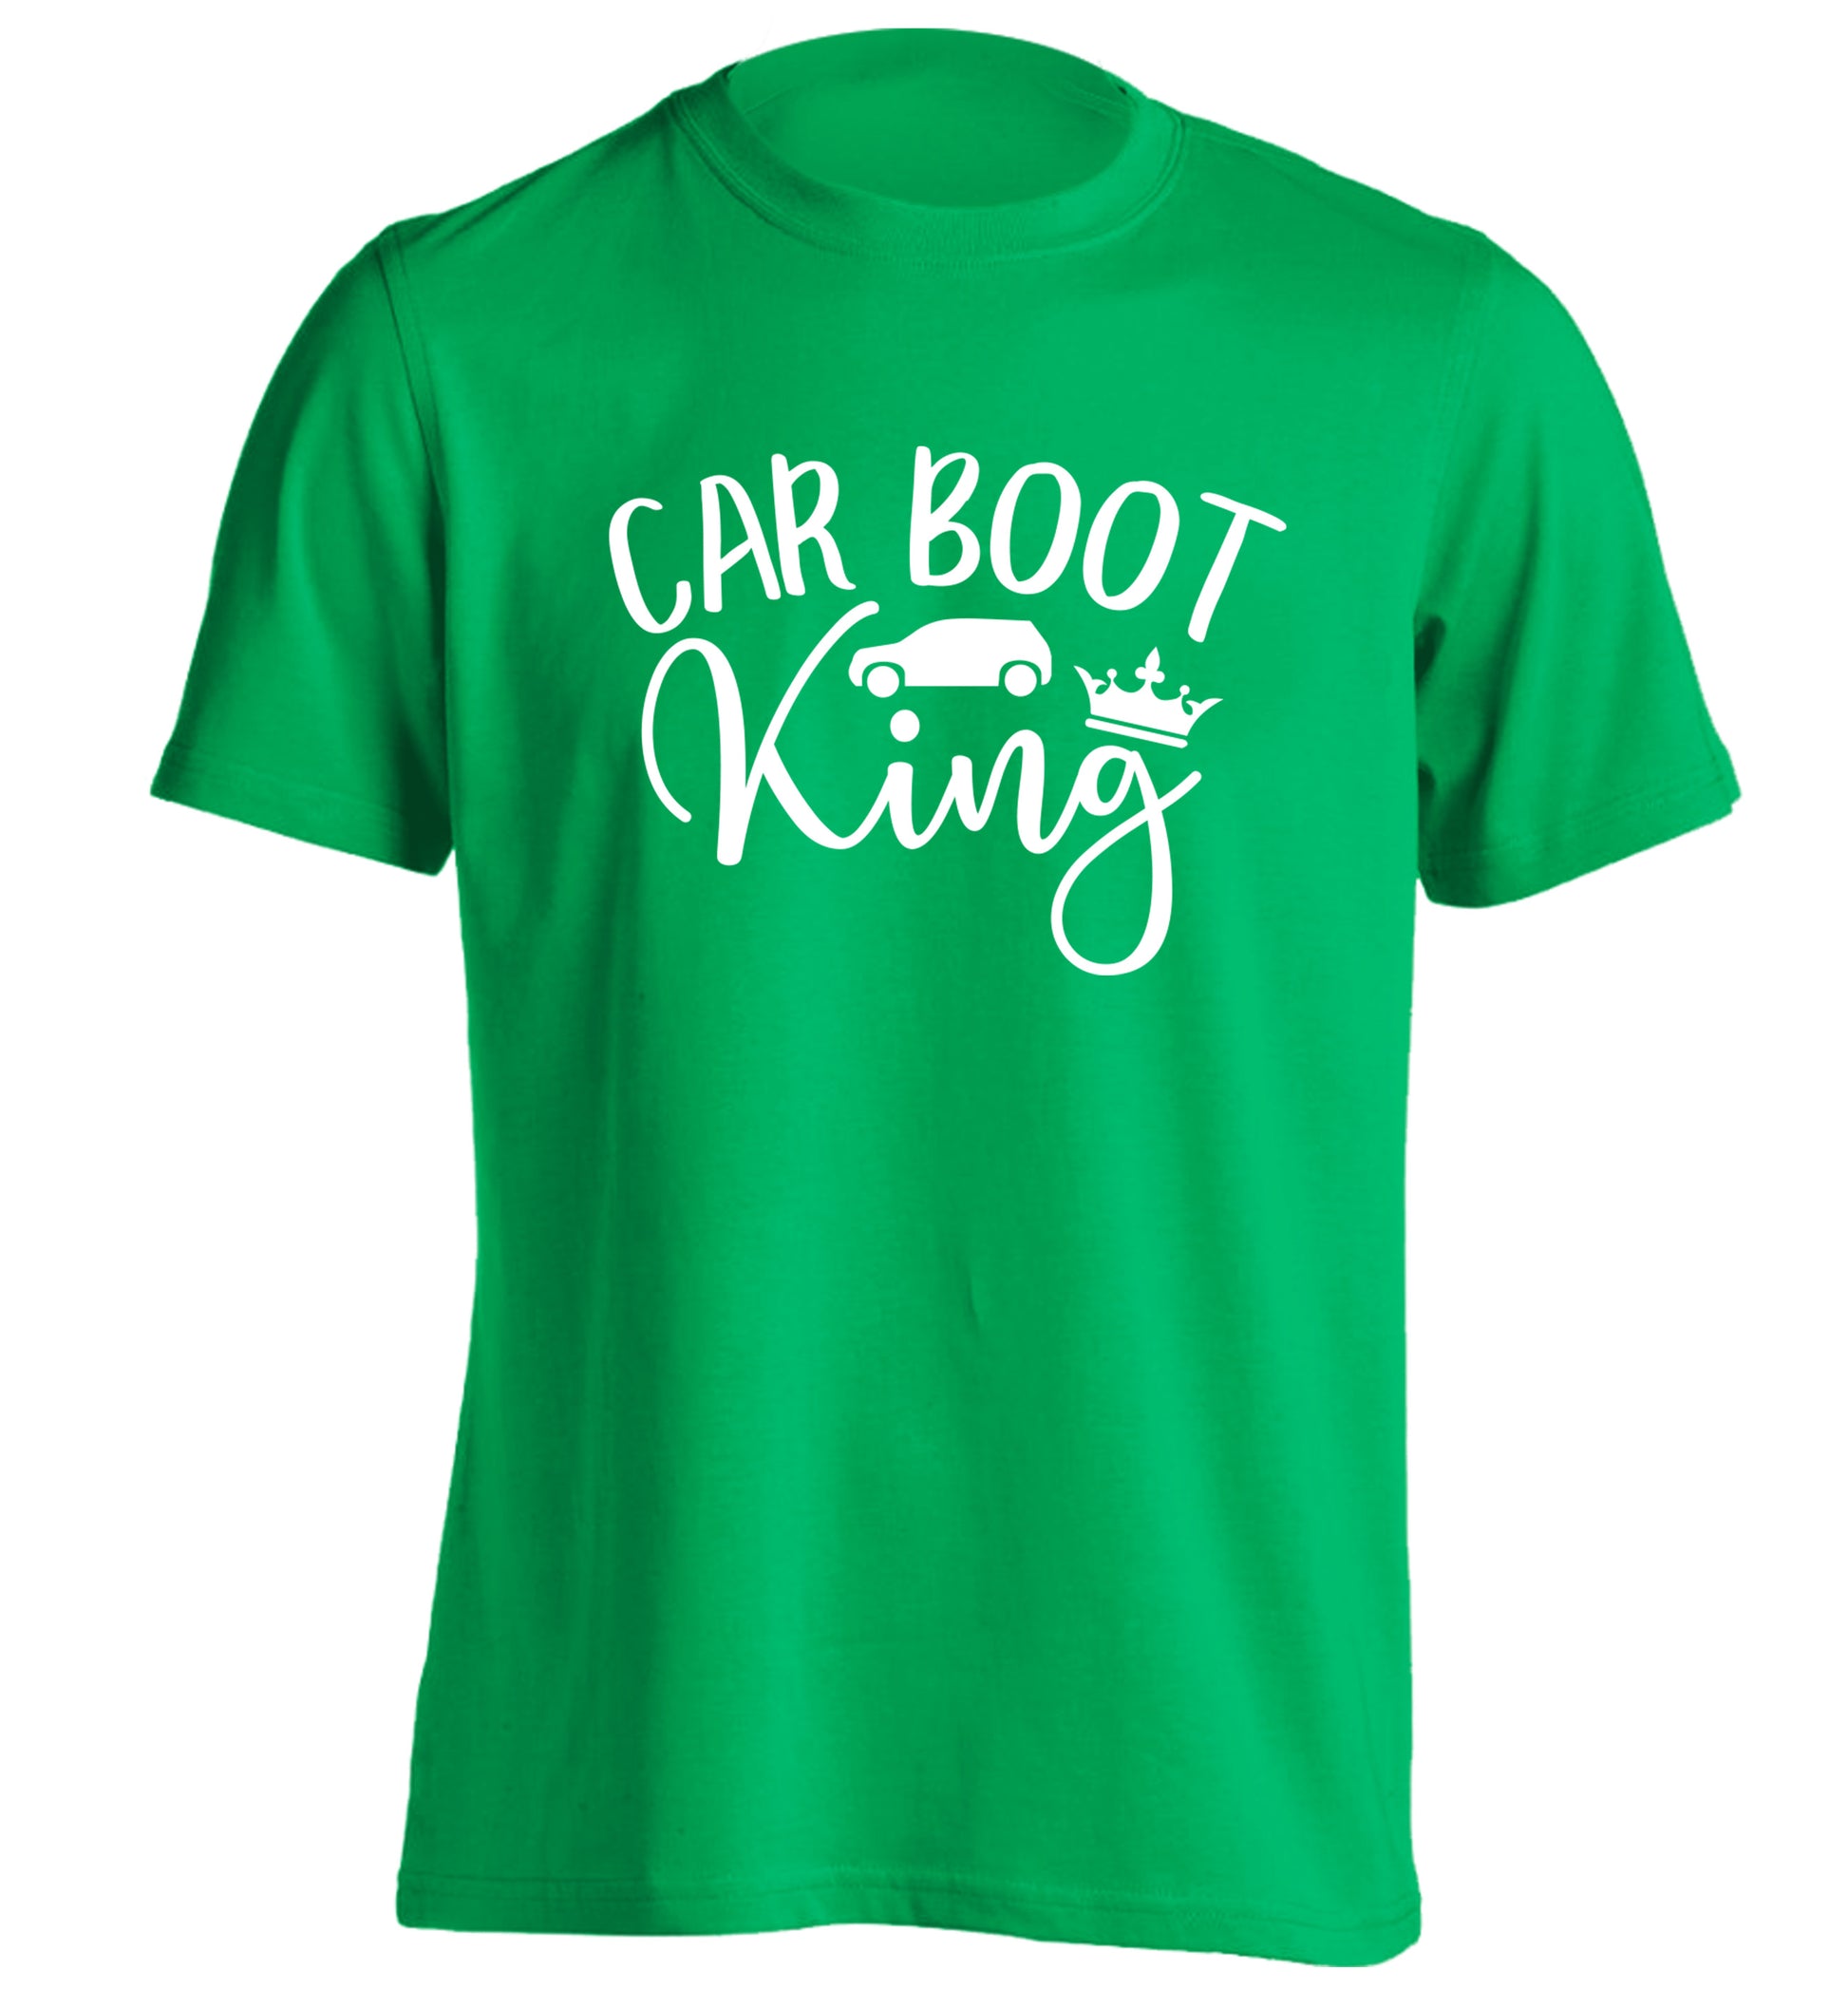 Carboot King adults unisex green Tshirt 2XL